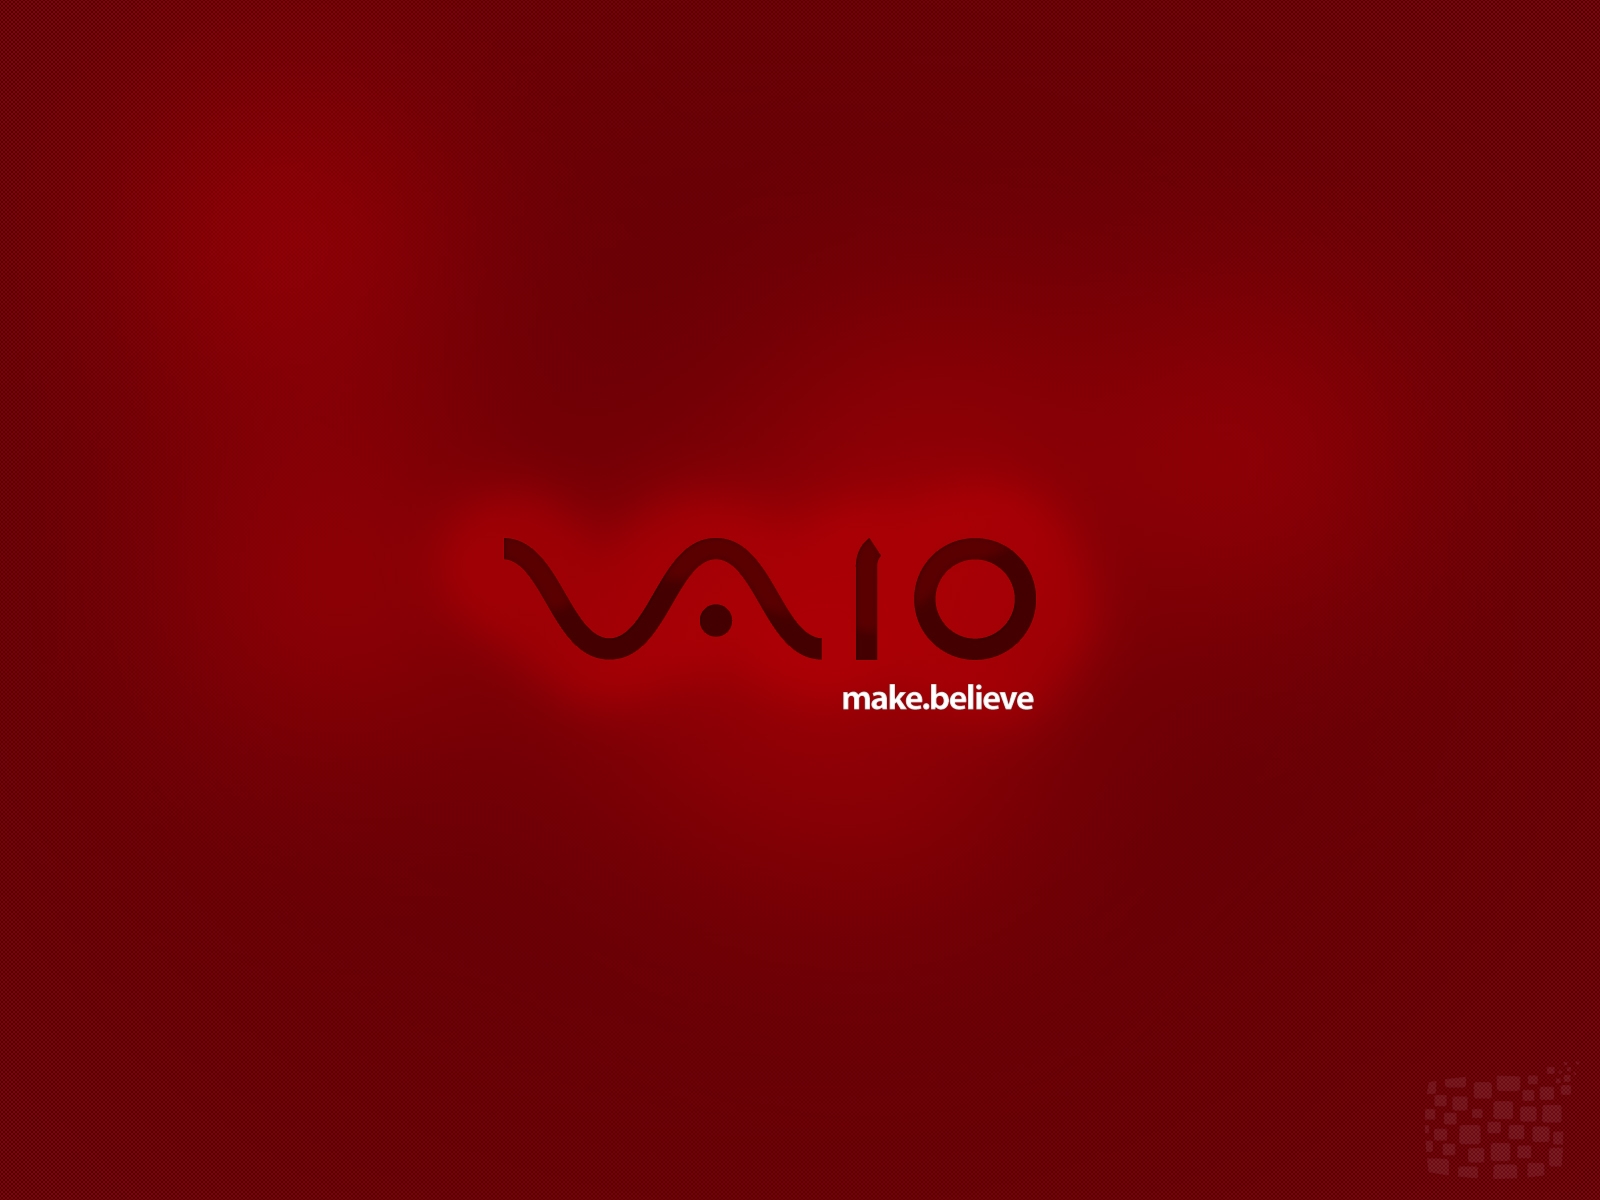 To Red Sony Vaio Wallpaper Click On Full Size And Then Right